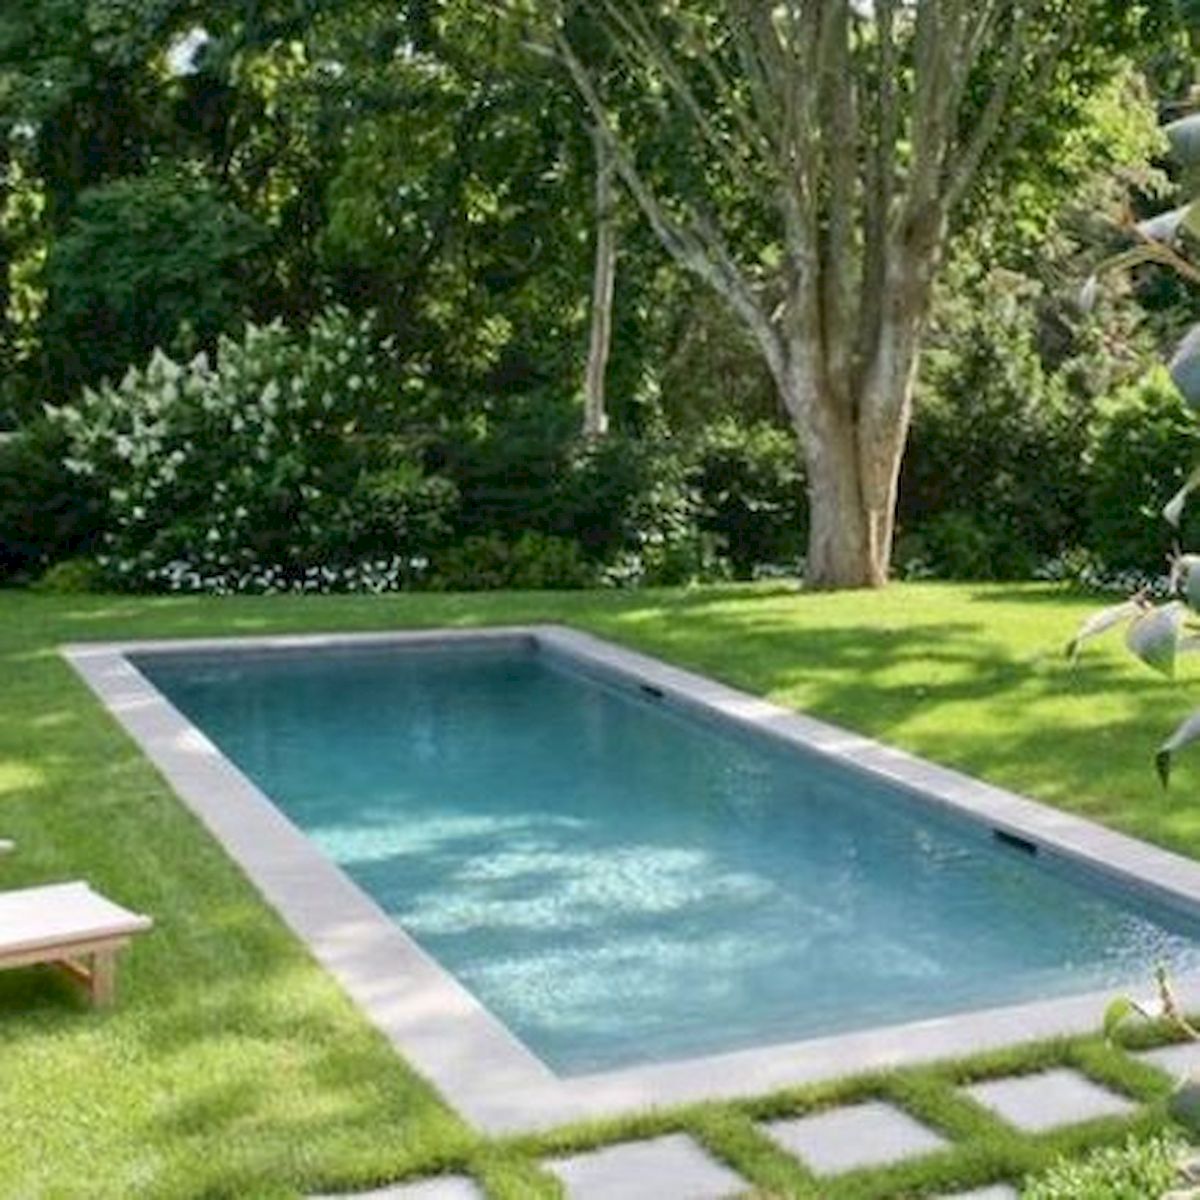 50 Gorgeous Small Swimming Pool Ideas For Small Backyard (19)